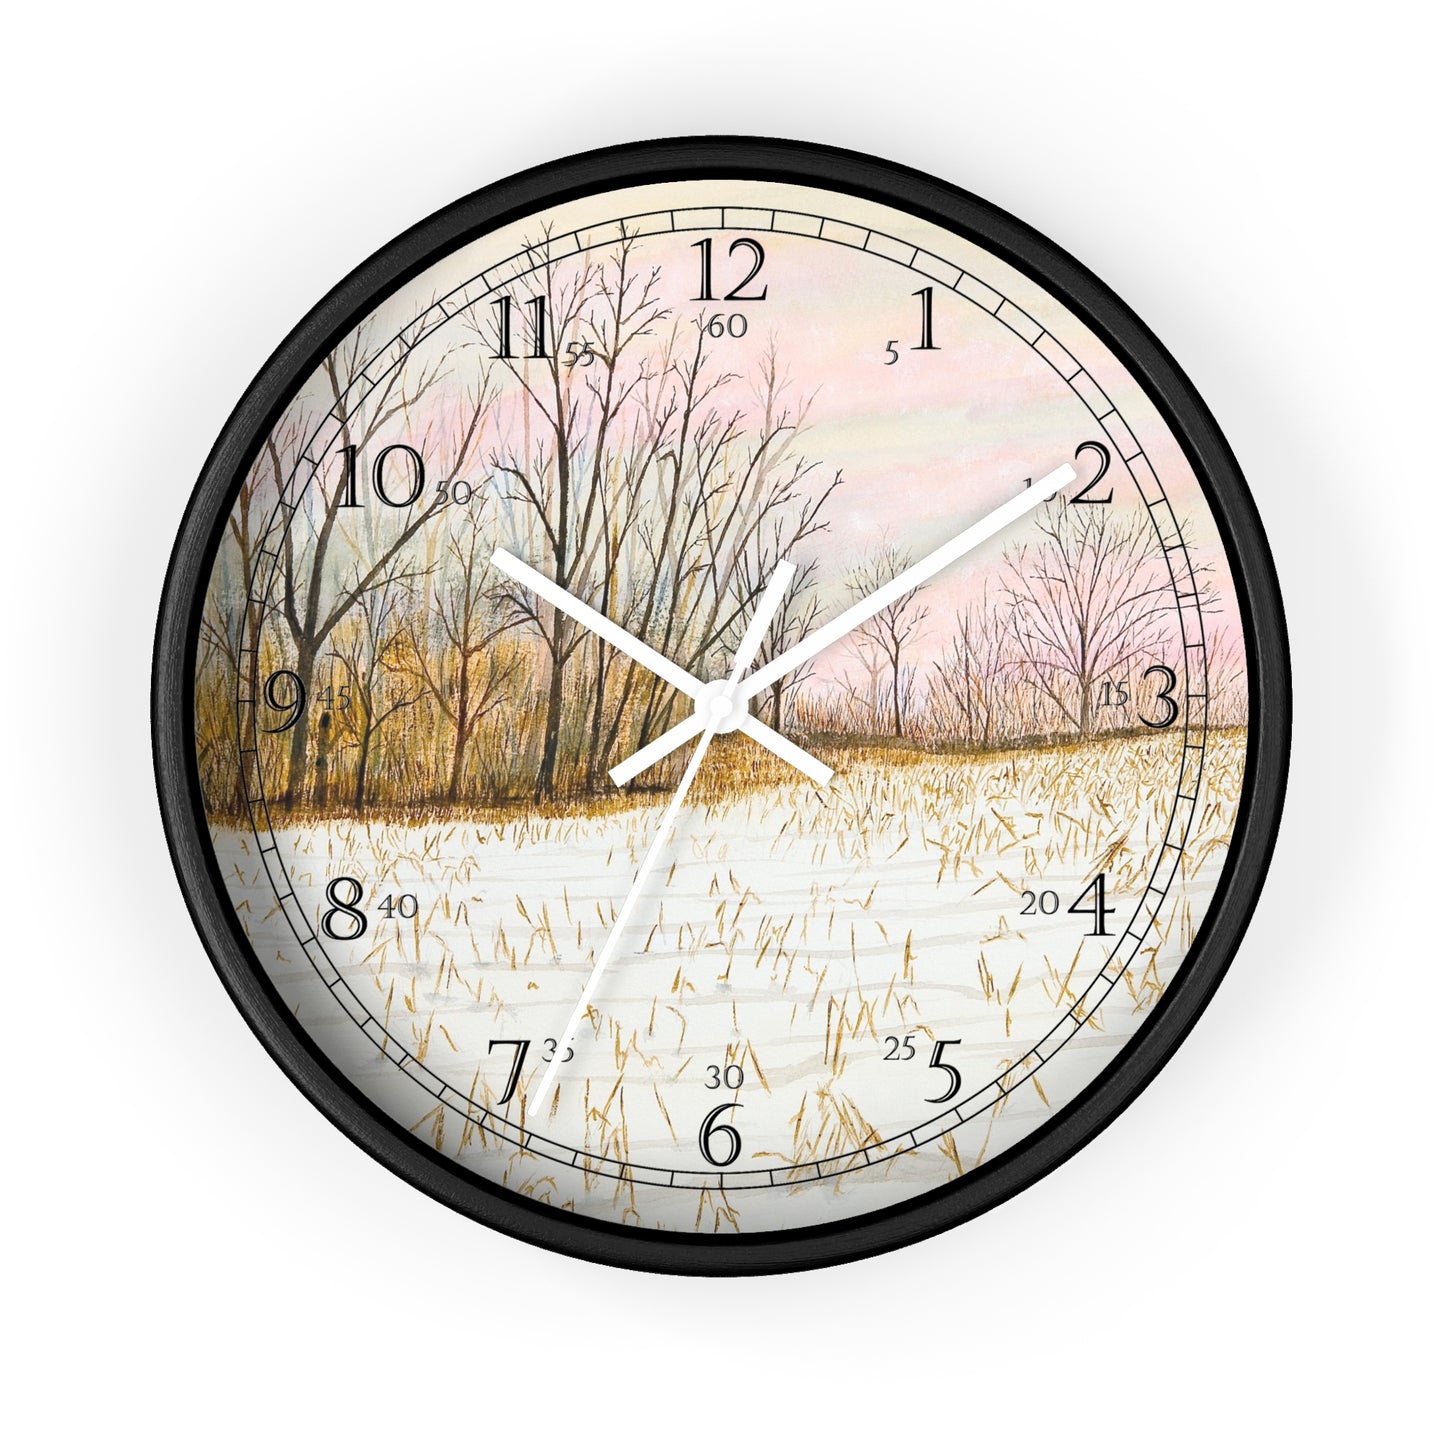 First Snow English Numeral Clock